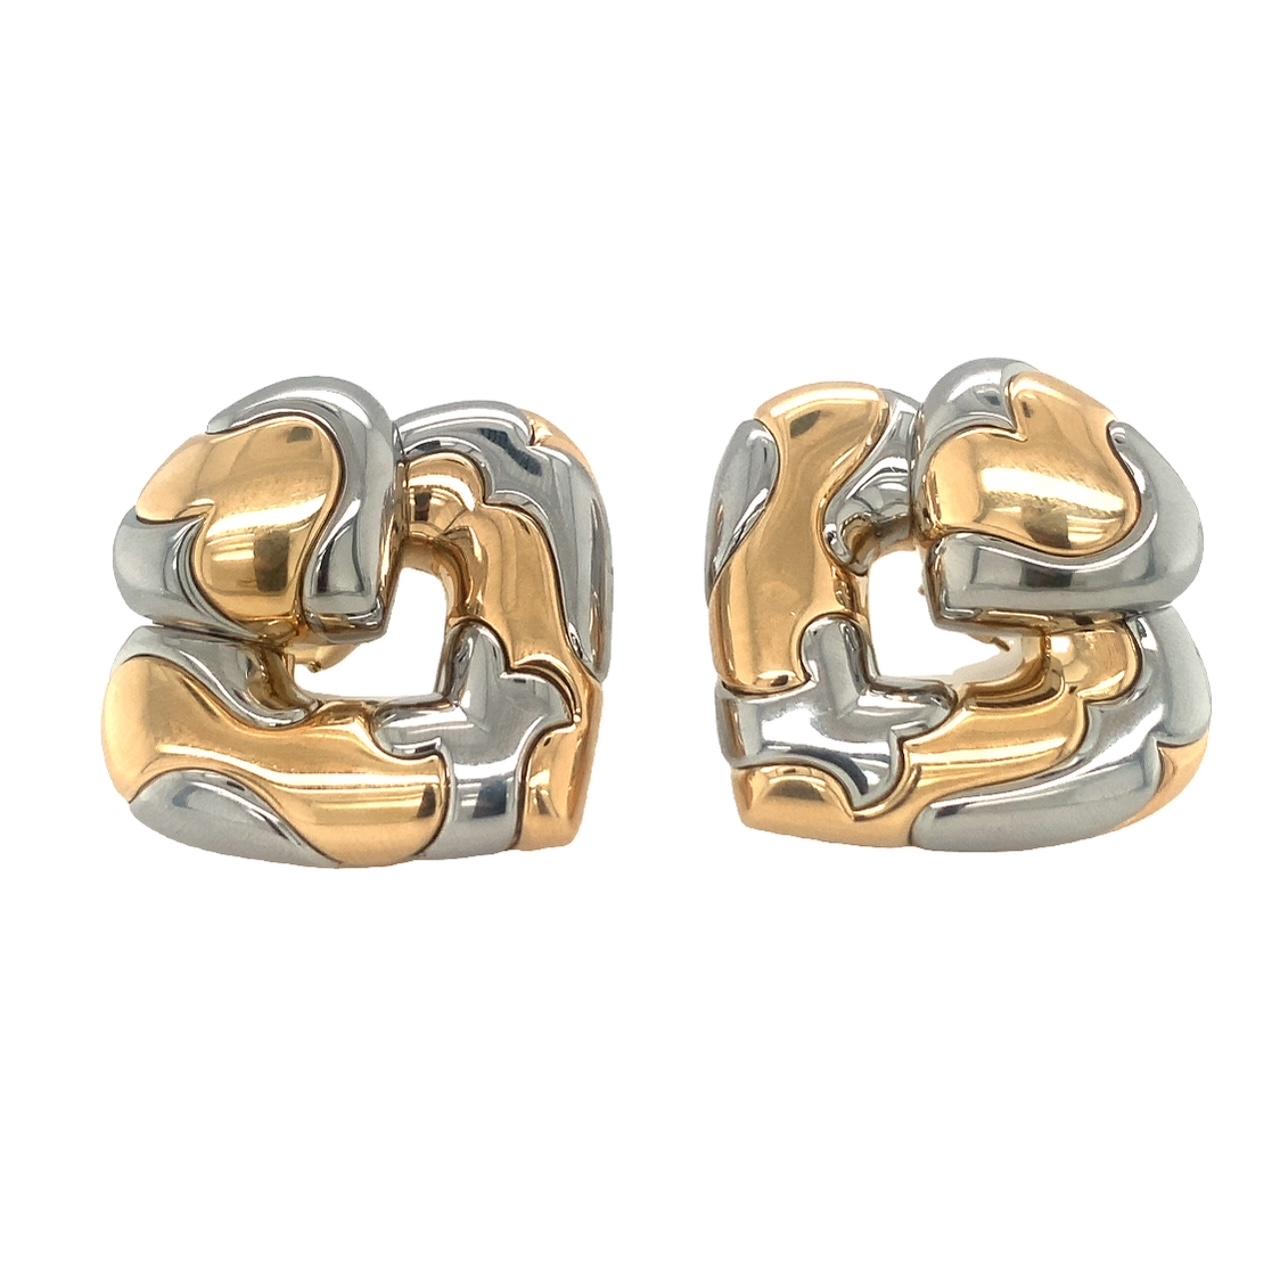 Heart-shaped earrings with patchy, off-setting yellow gold and stainless steel design and high polish finish throughout attributed to Marina B. Features posts and Omega backs. Circa 1980s.

Substantial, bold, sleek.

Additional information:
Metal: